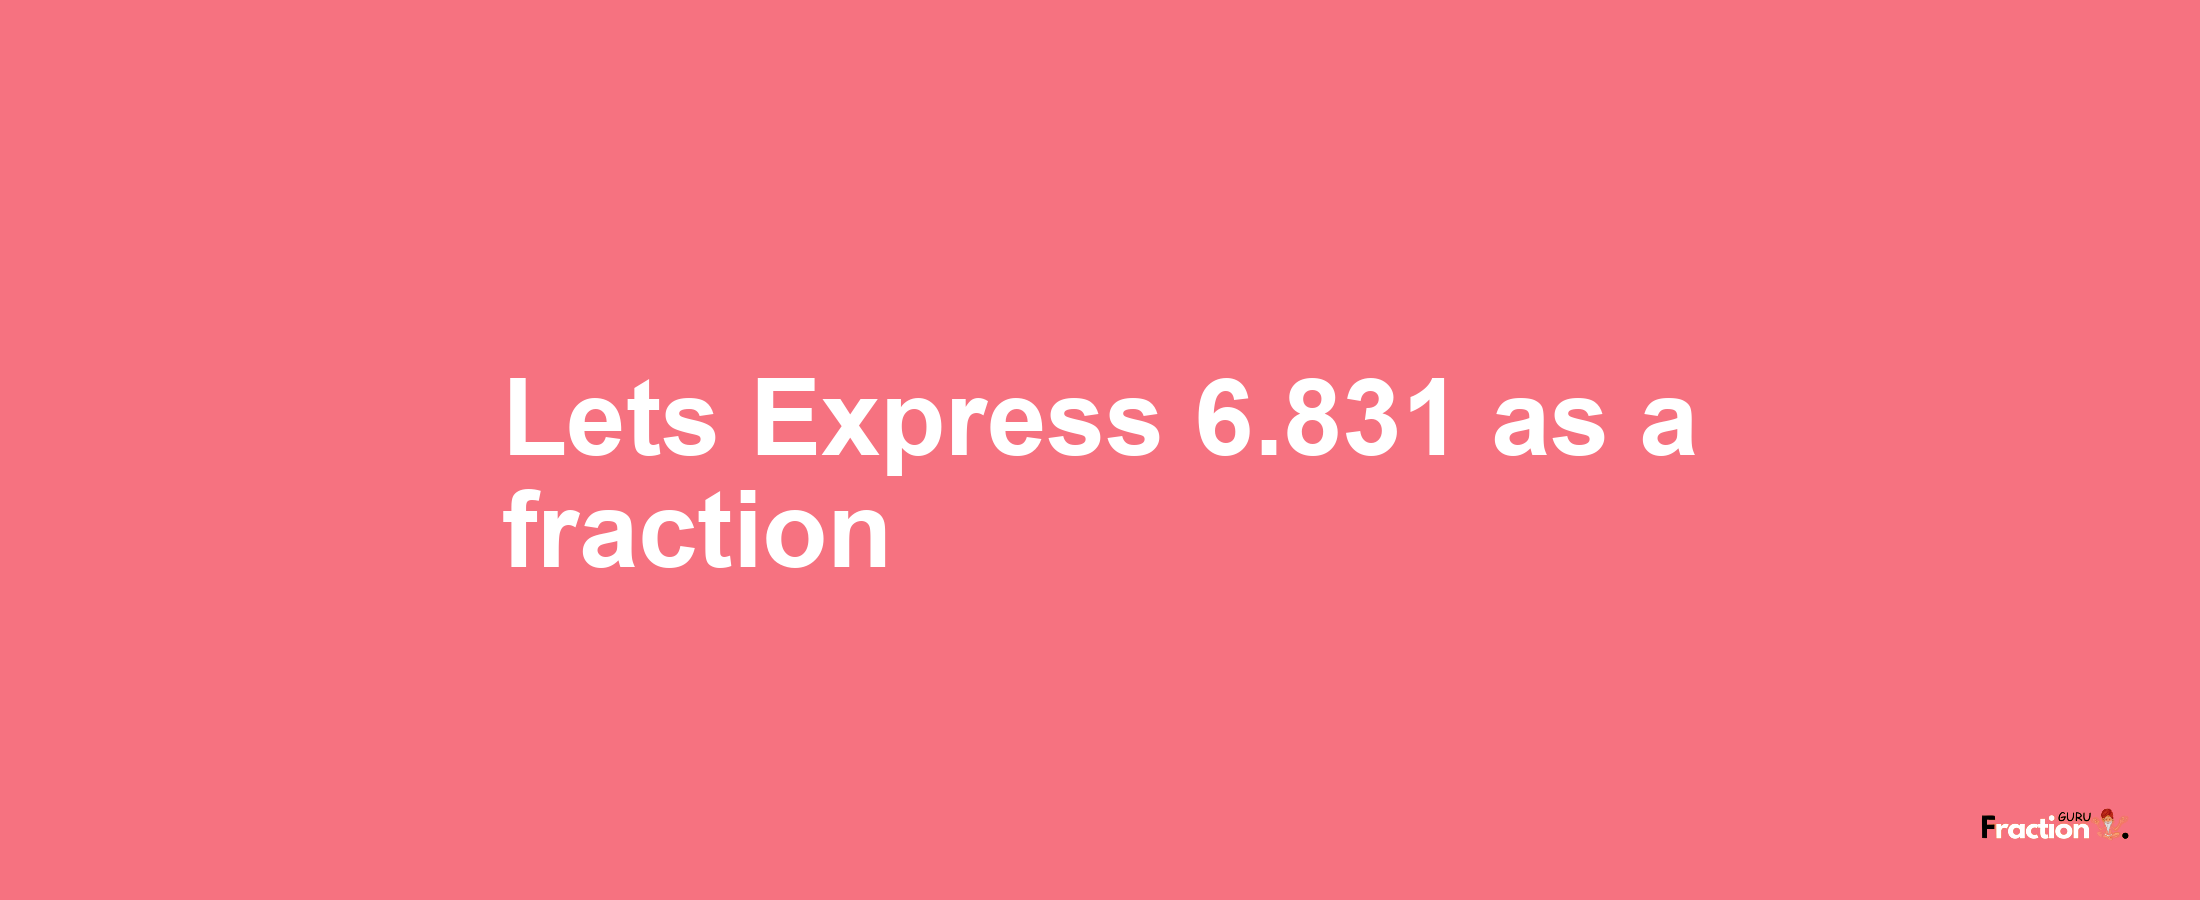 Lets Express 6.831 as afraction